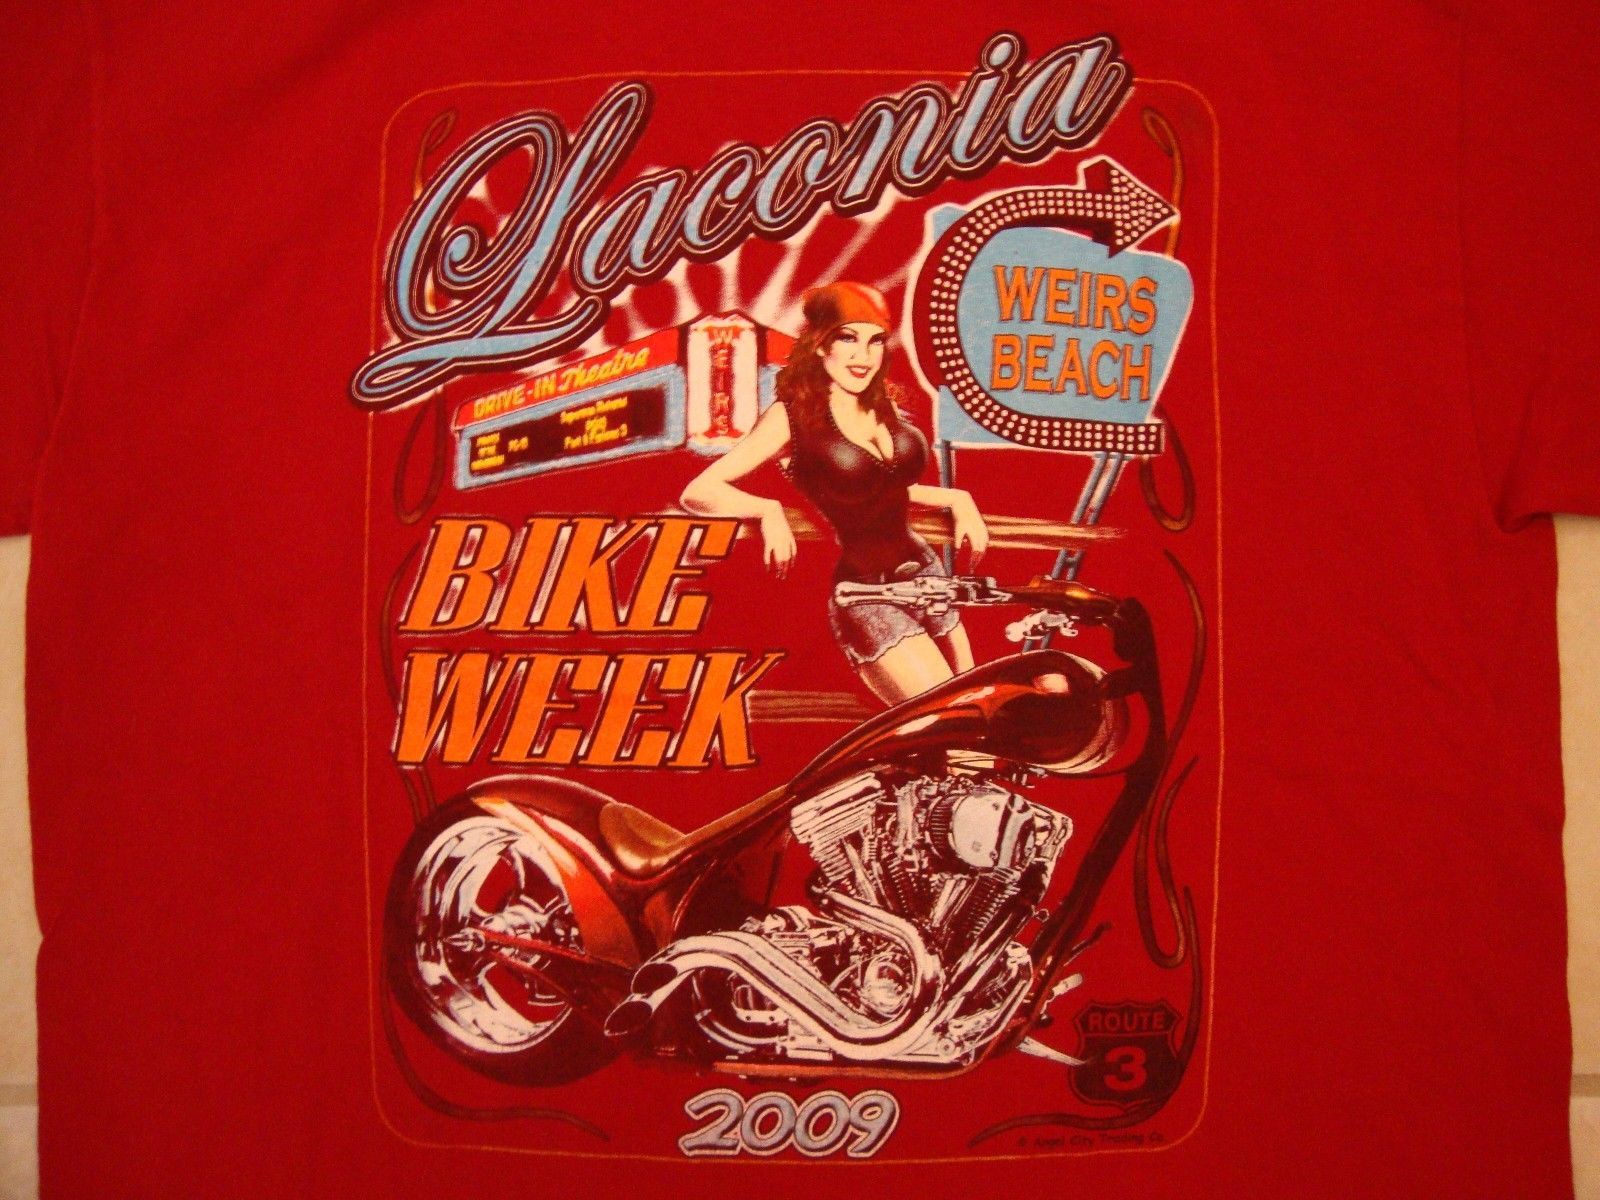 Primary image for Weirs Beach Laconia Bike Week 2009 Motorcycle Rally Red T Shirt M